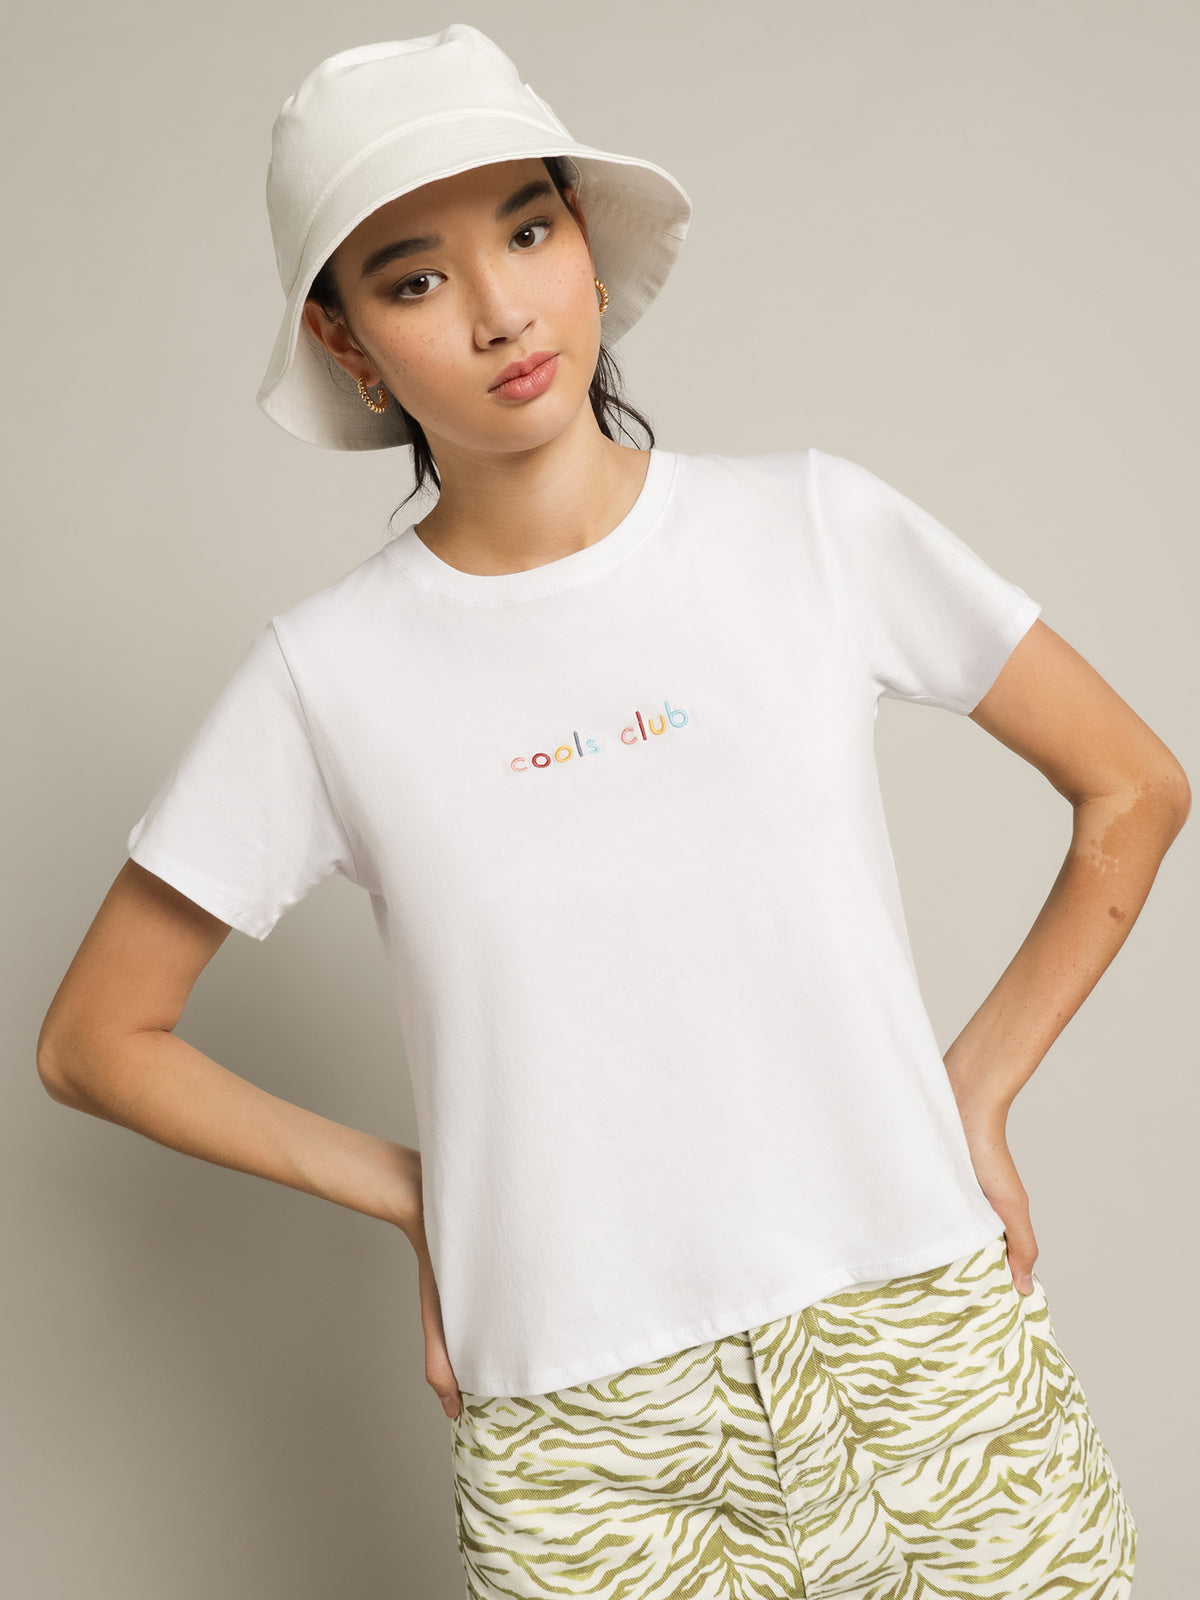 Colour Club Real T-Shirt in White